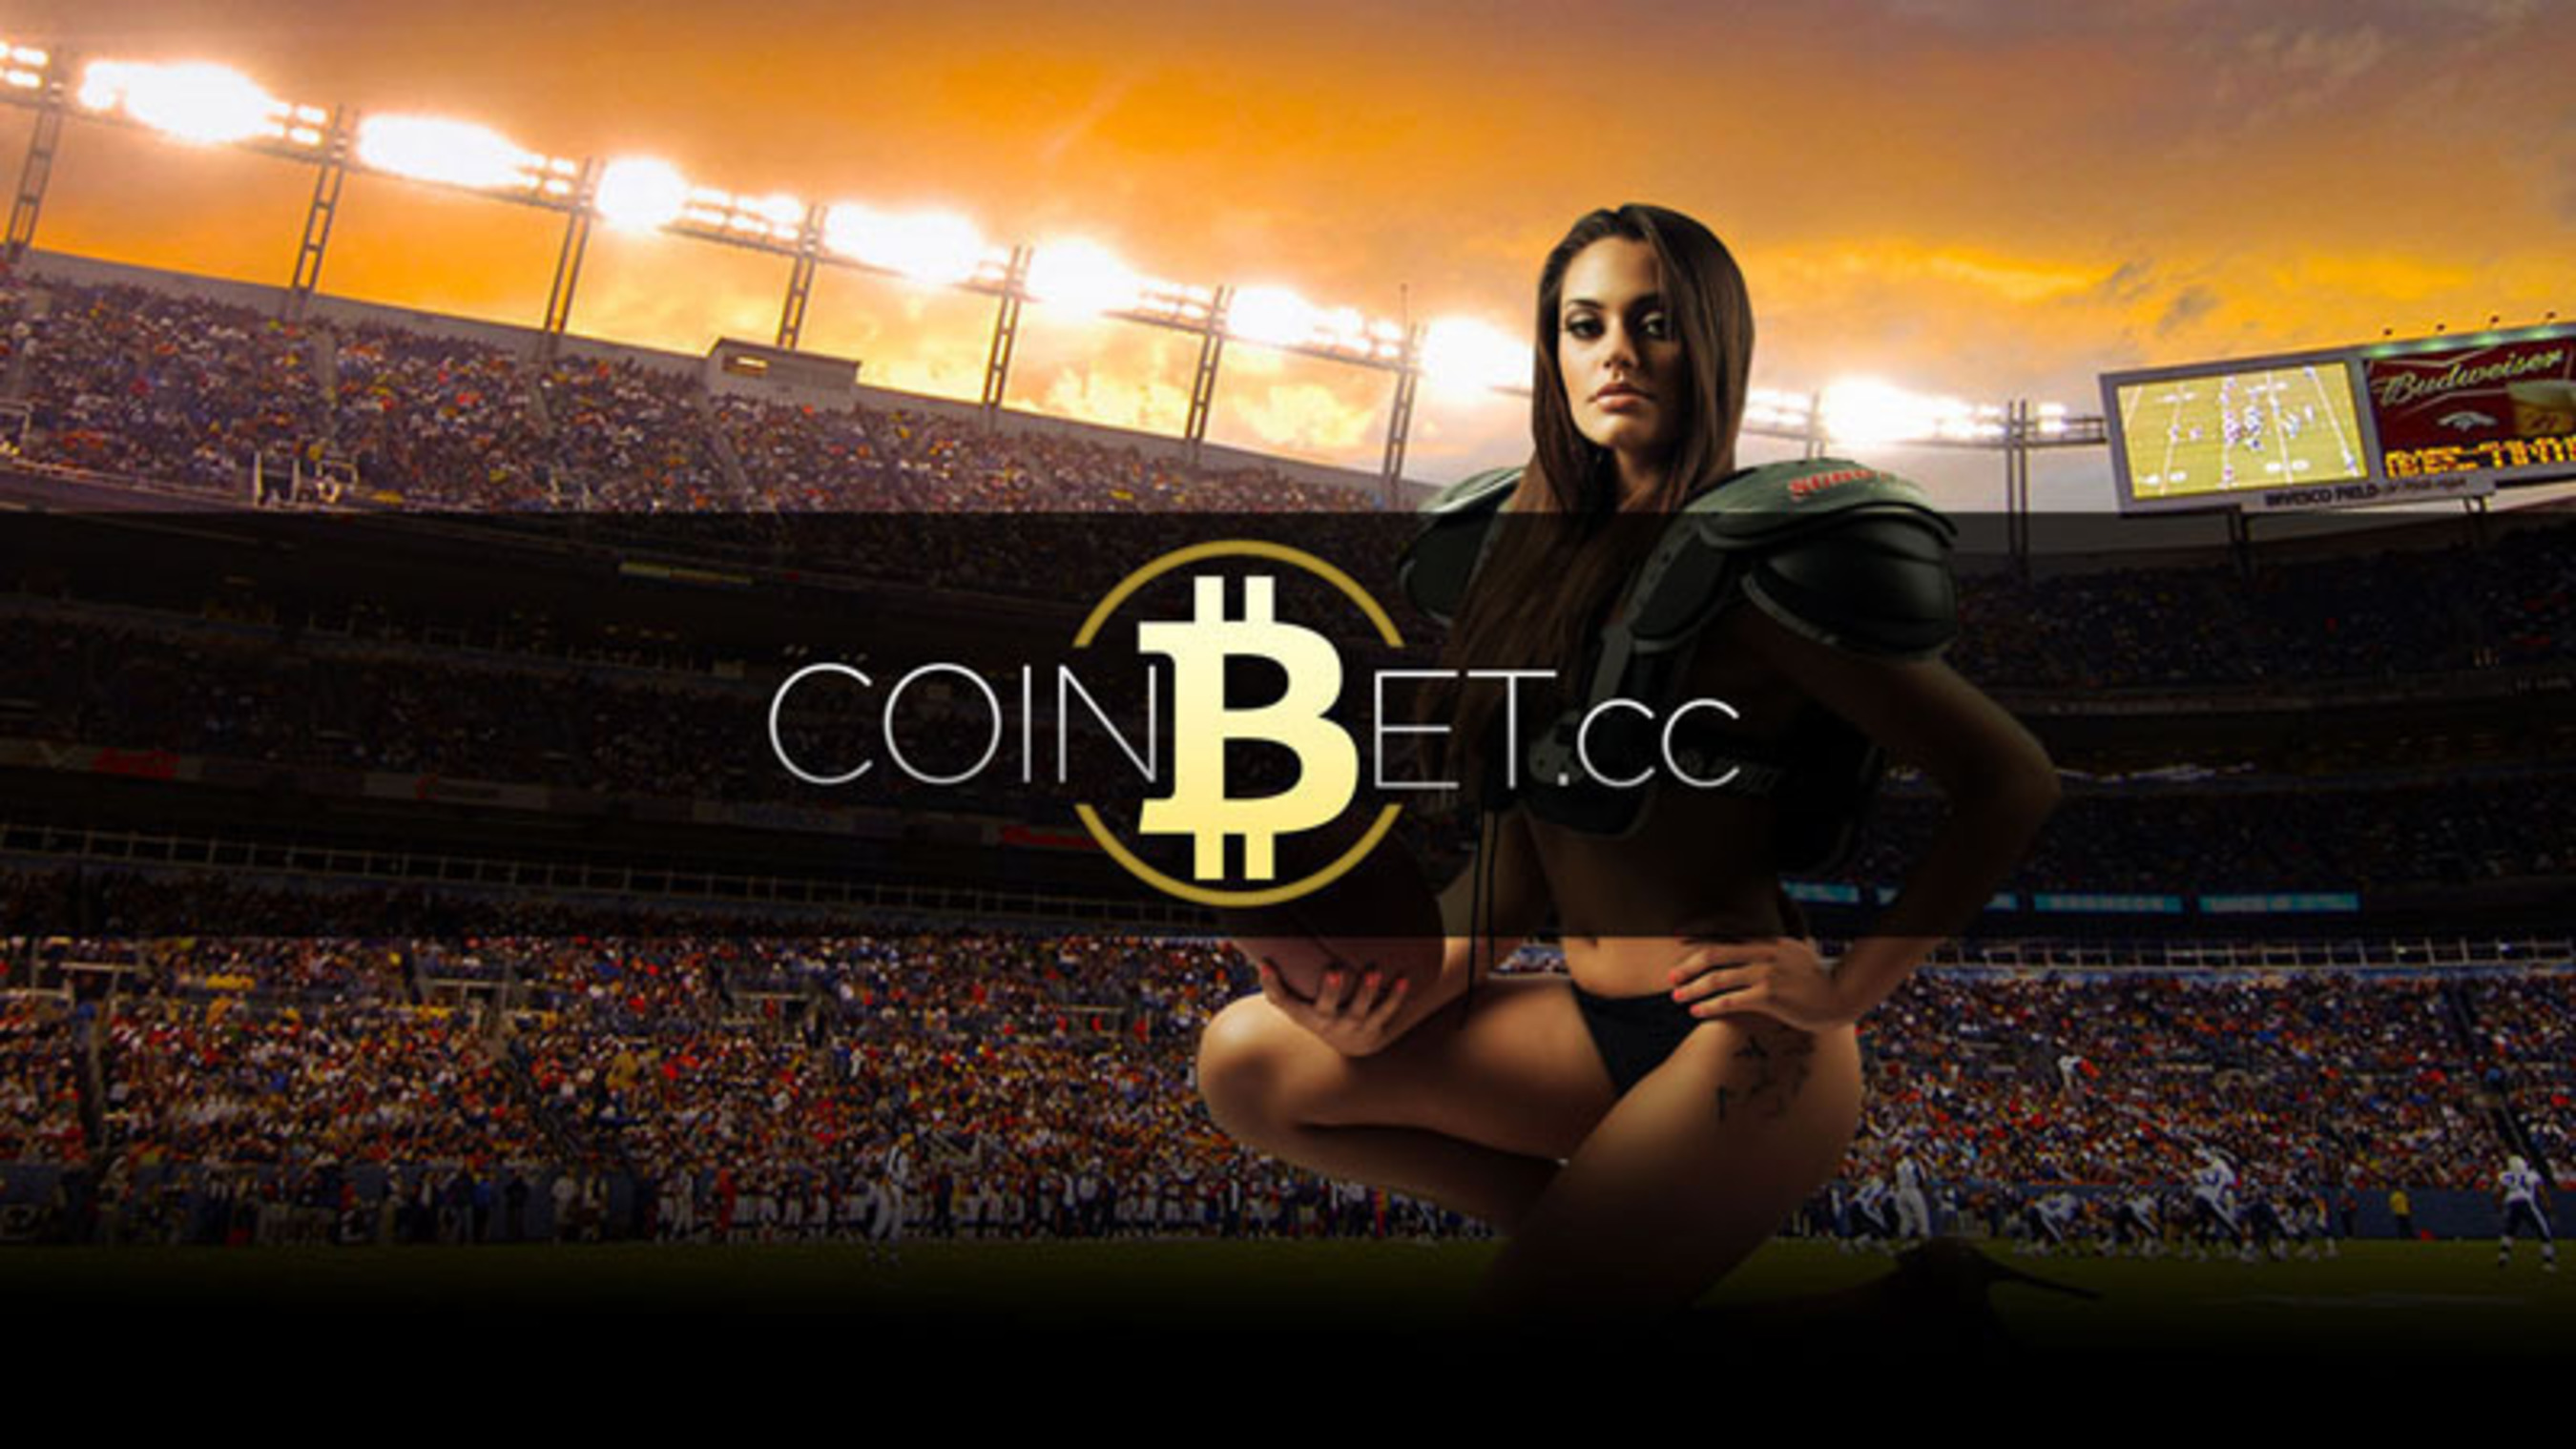 CoinBet(R) is not only the first to bring legal online gambling back for U.S. residents, but we are also the first bitcoin processing online SportsBook & Casino EVER to process cash payouts for players within 30 minutes of a wagering result becoming final! With instant BTC deposit, instant BTC cashout, no max wagering, facebook plugin, mobile app, and even a fully anonymous registration option, We clearly offer you and advantages and options that you cant find anywhere else! (PRNewsFoto/CoinBet Interactive Gaming) (PRNewsFoto/COINBET INTERACTIVE GAMING)